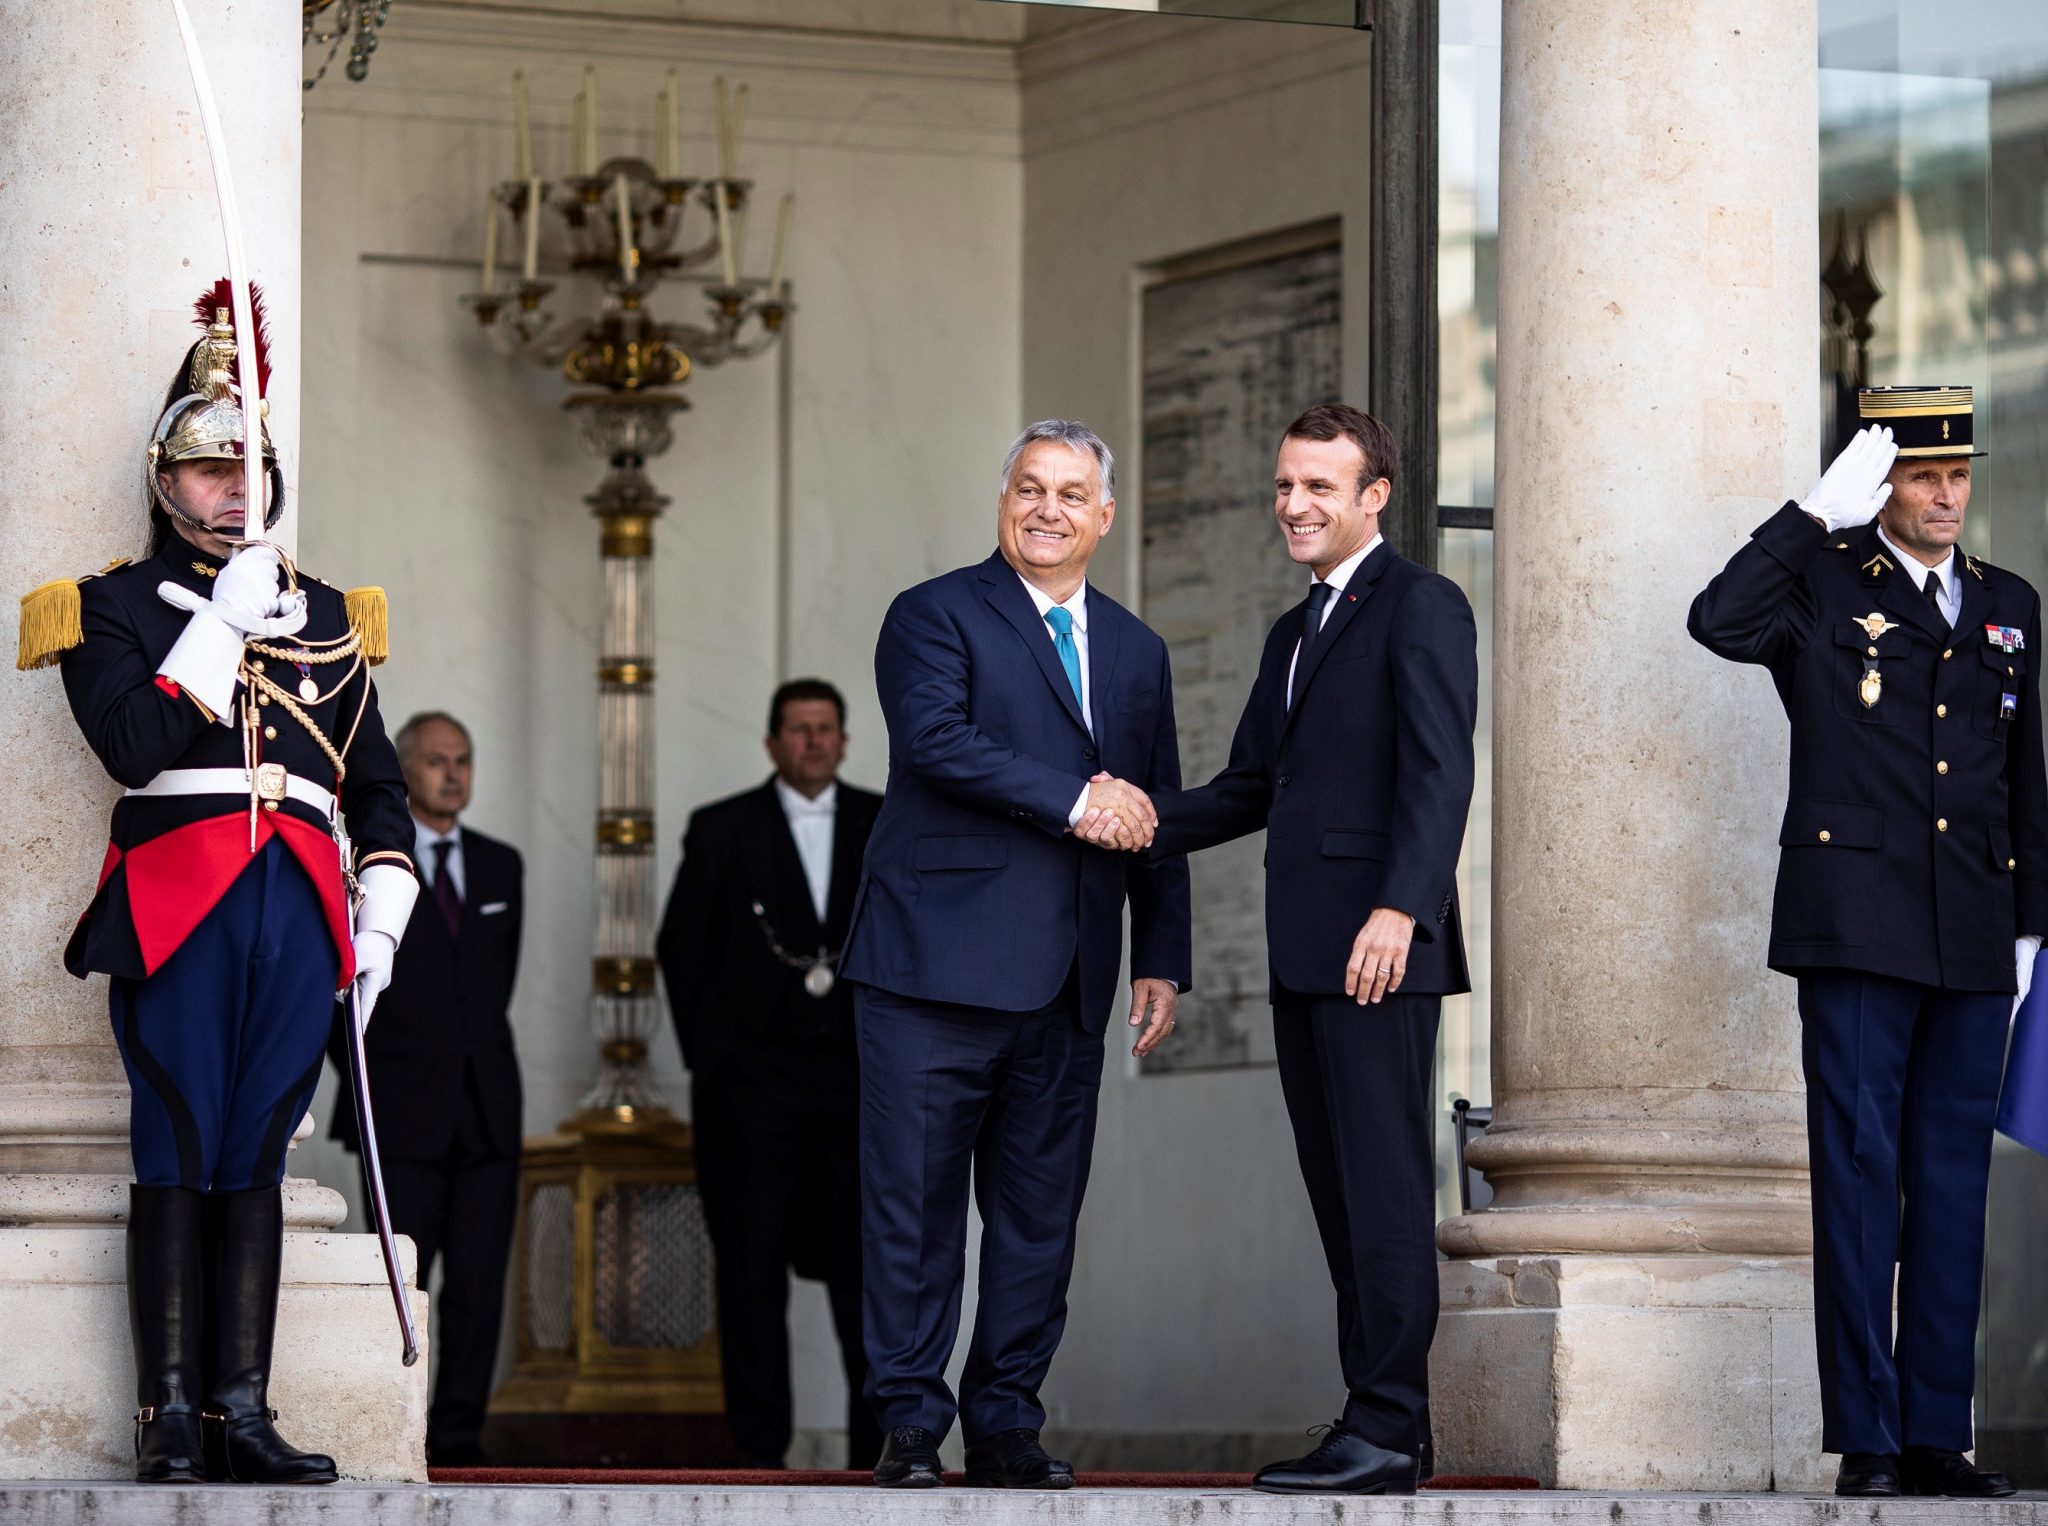 PM Orbán Greets France on July 14: 'The French and the Hungarian are two freedom-loving nations'